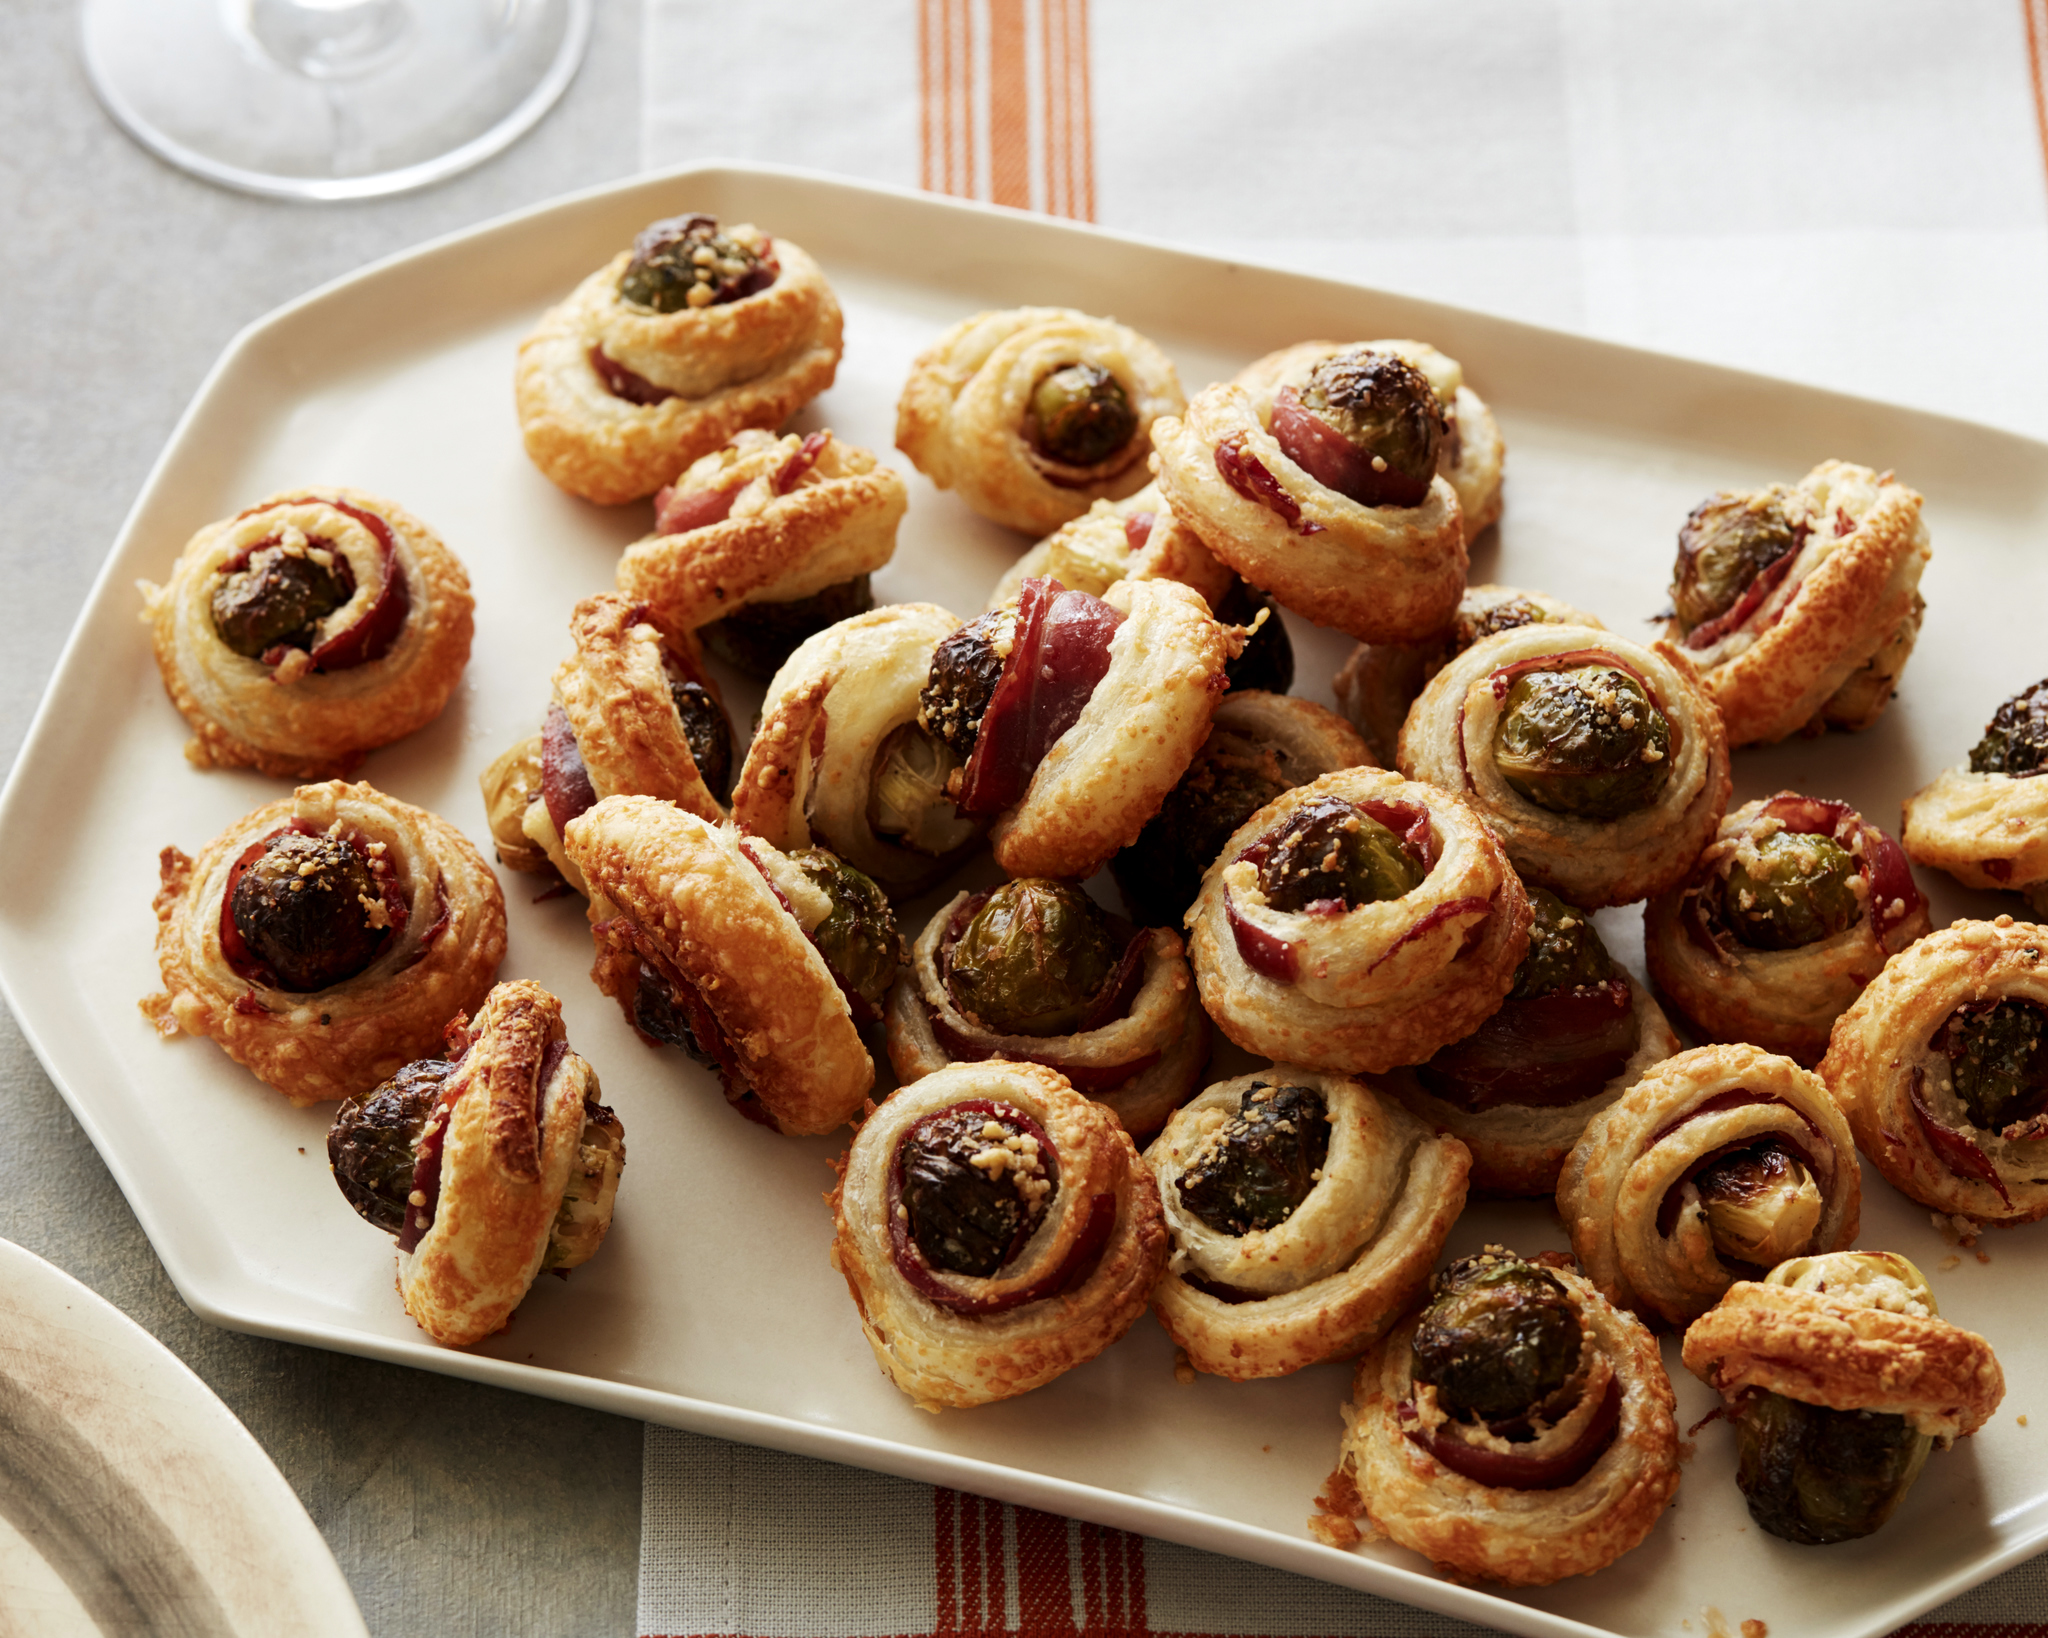 PHOTO: These Brussels sprouts are a fun fall twist on pigs-in-a-blanket with Parmesan cheese and puff pastry.